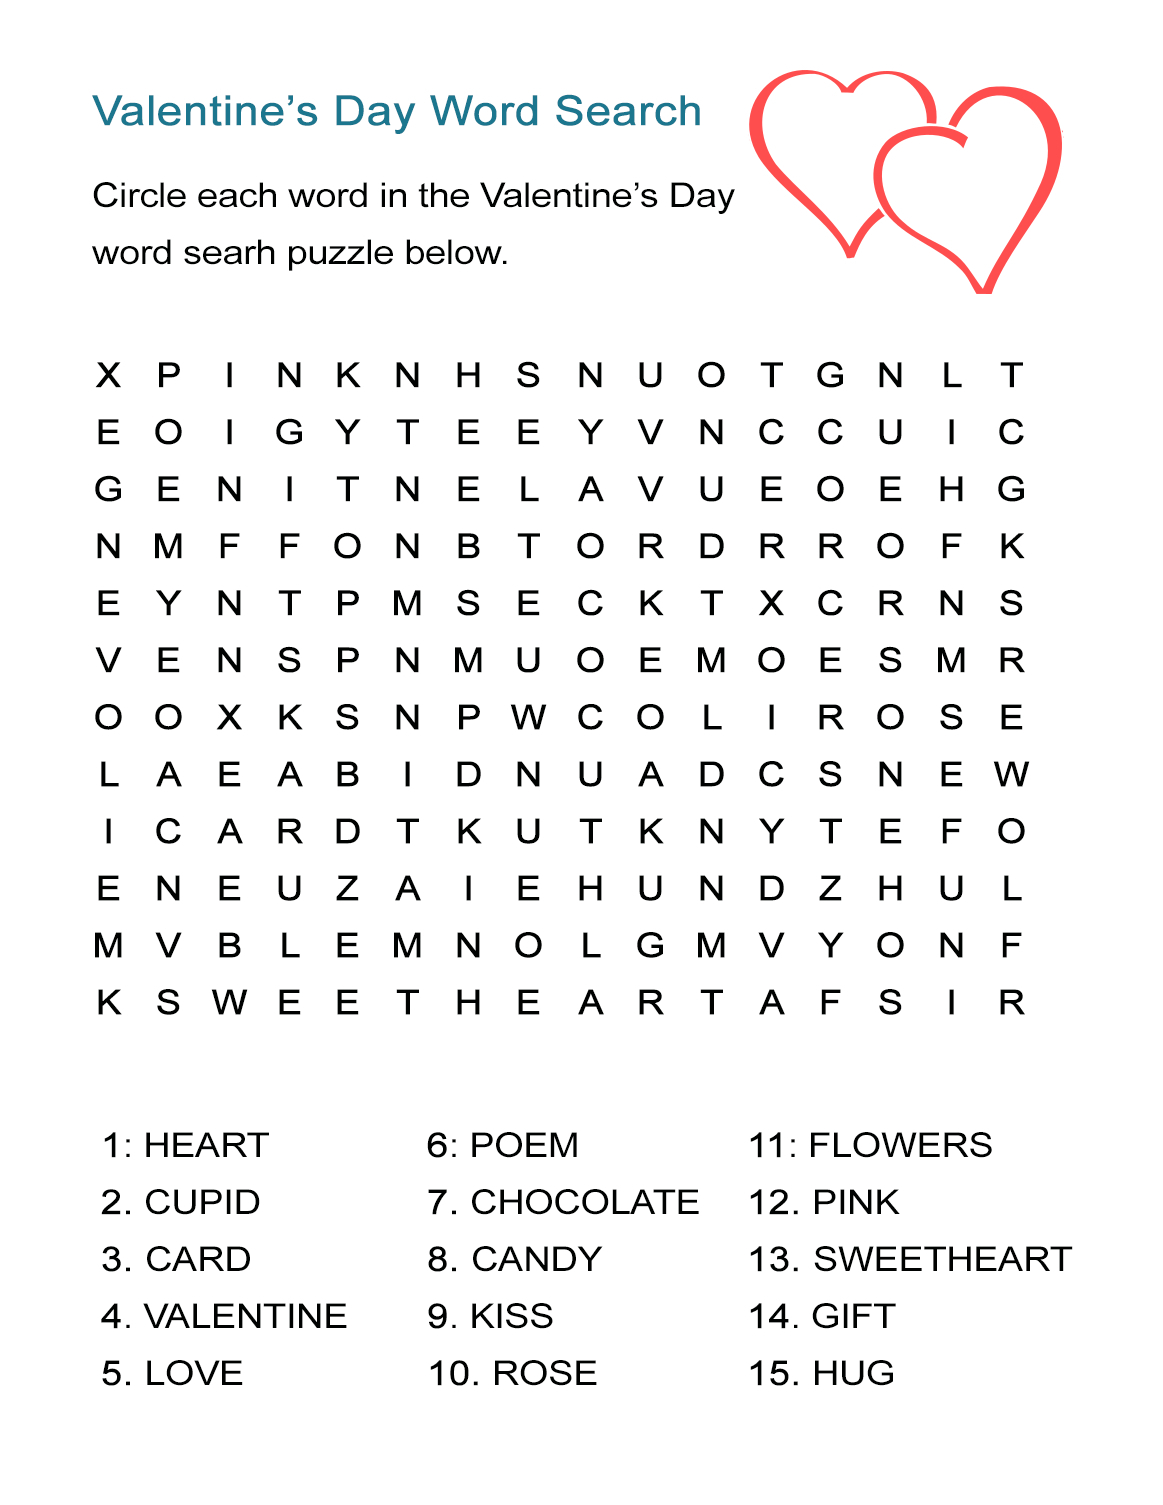 Valentine&amp;#039;s Day Word Search Puzzle: Free Worksheet For February 14 - Printable Valentine Puzzles